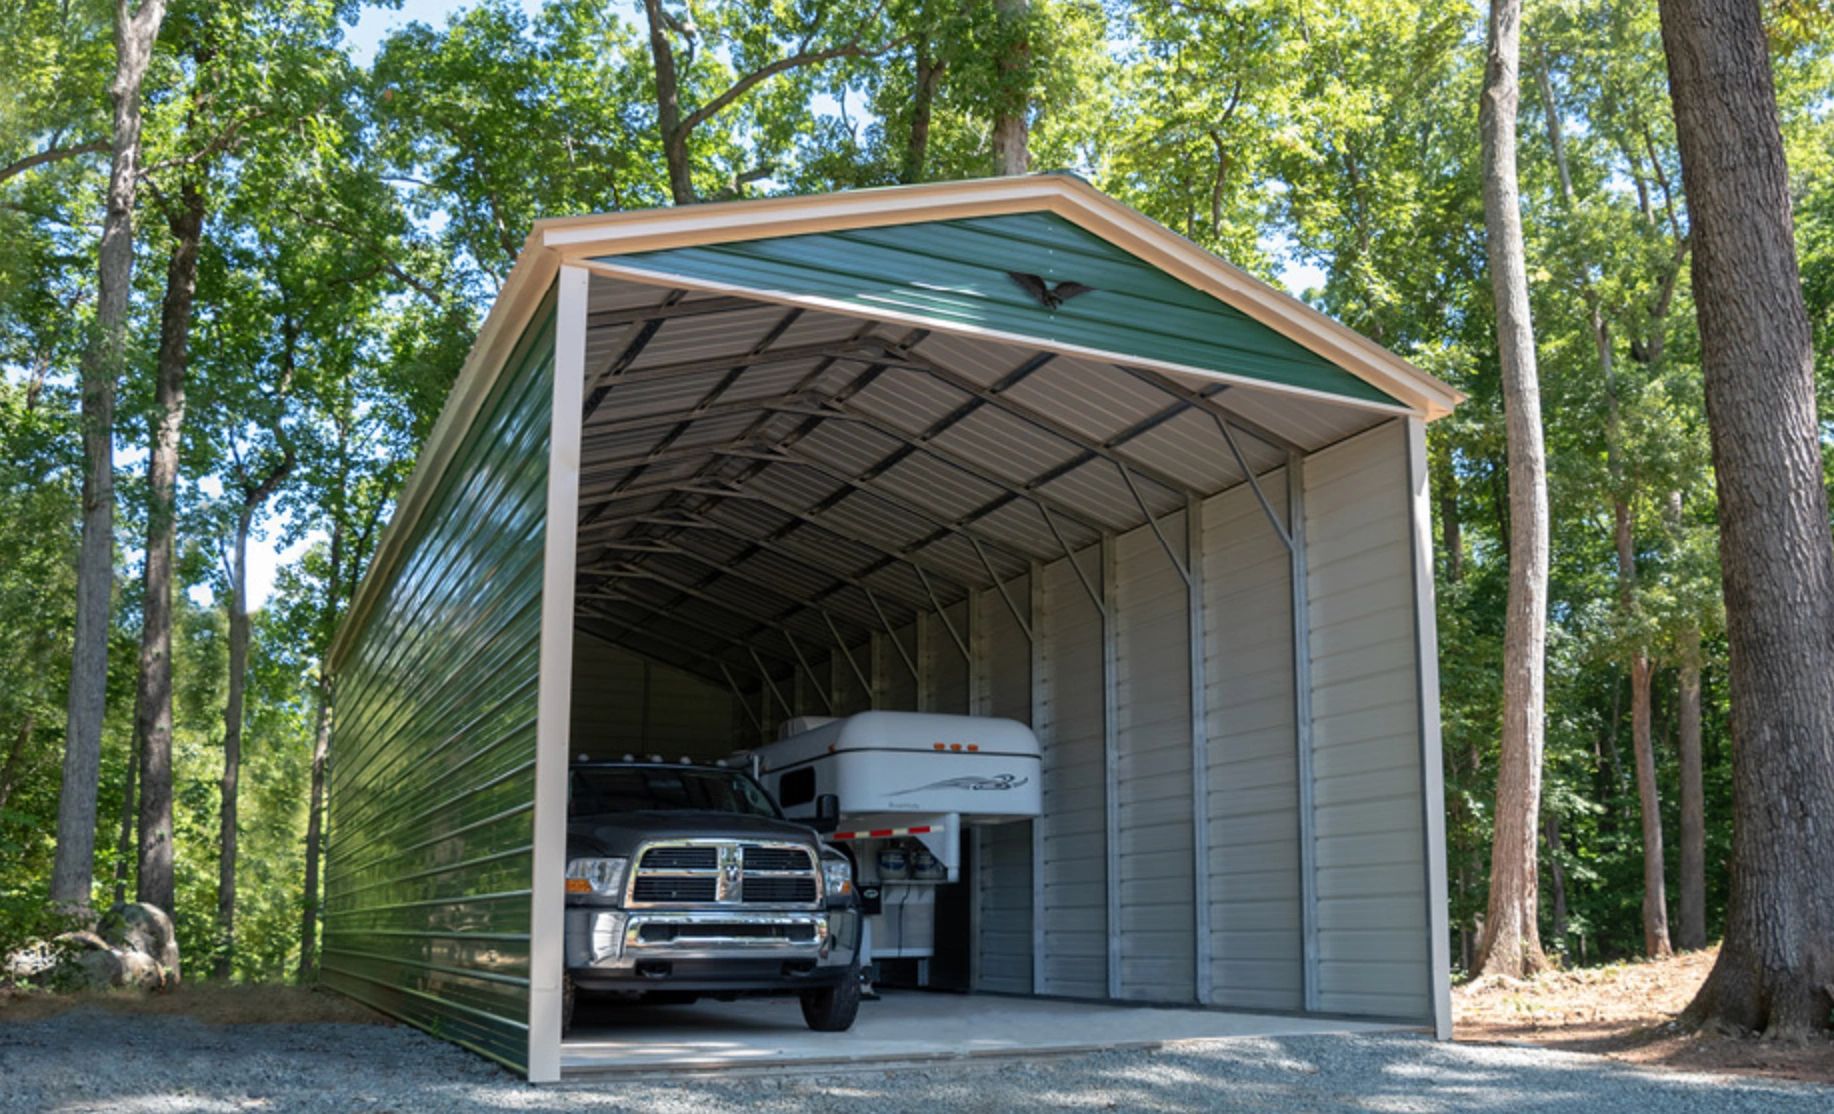 Partially Enclosed Metal carport for storage of boats, trailers and rv. 